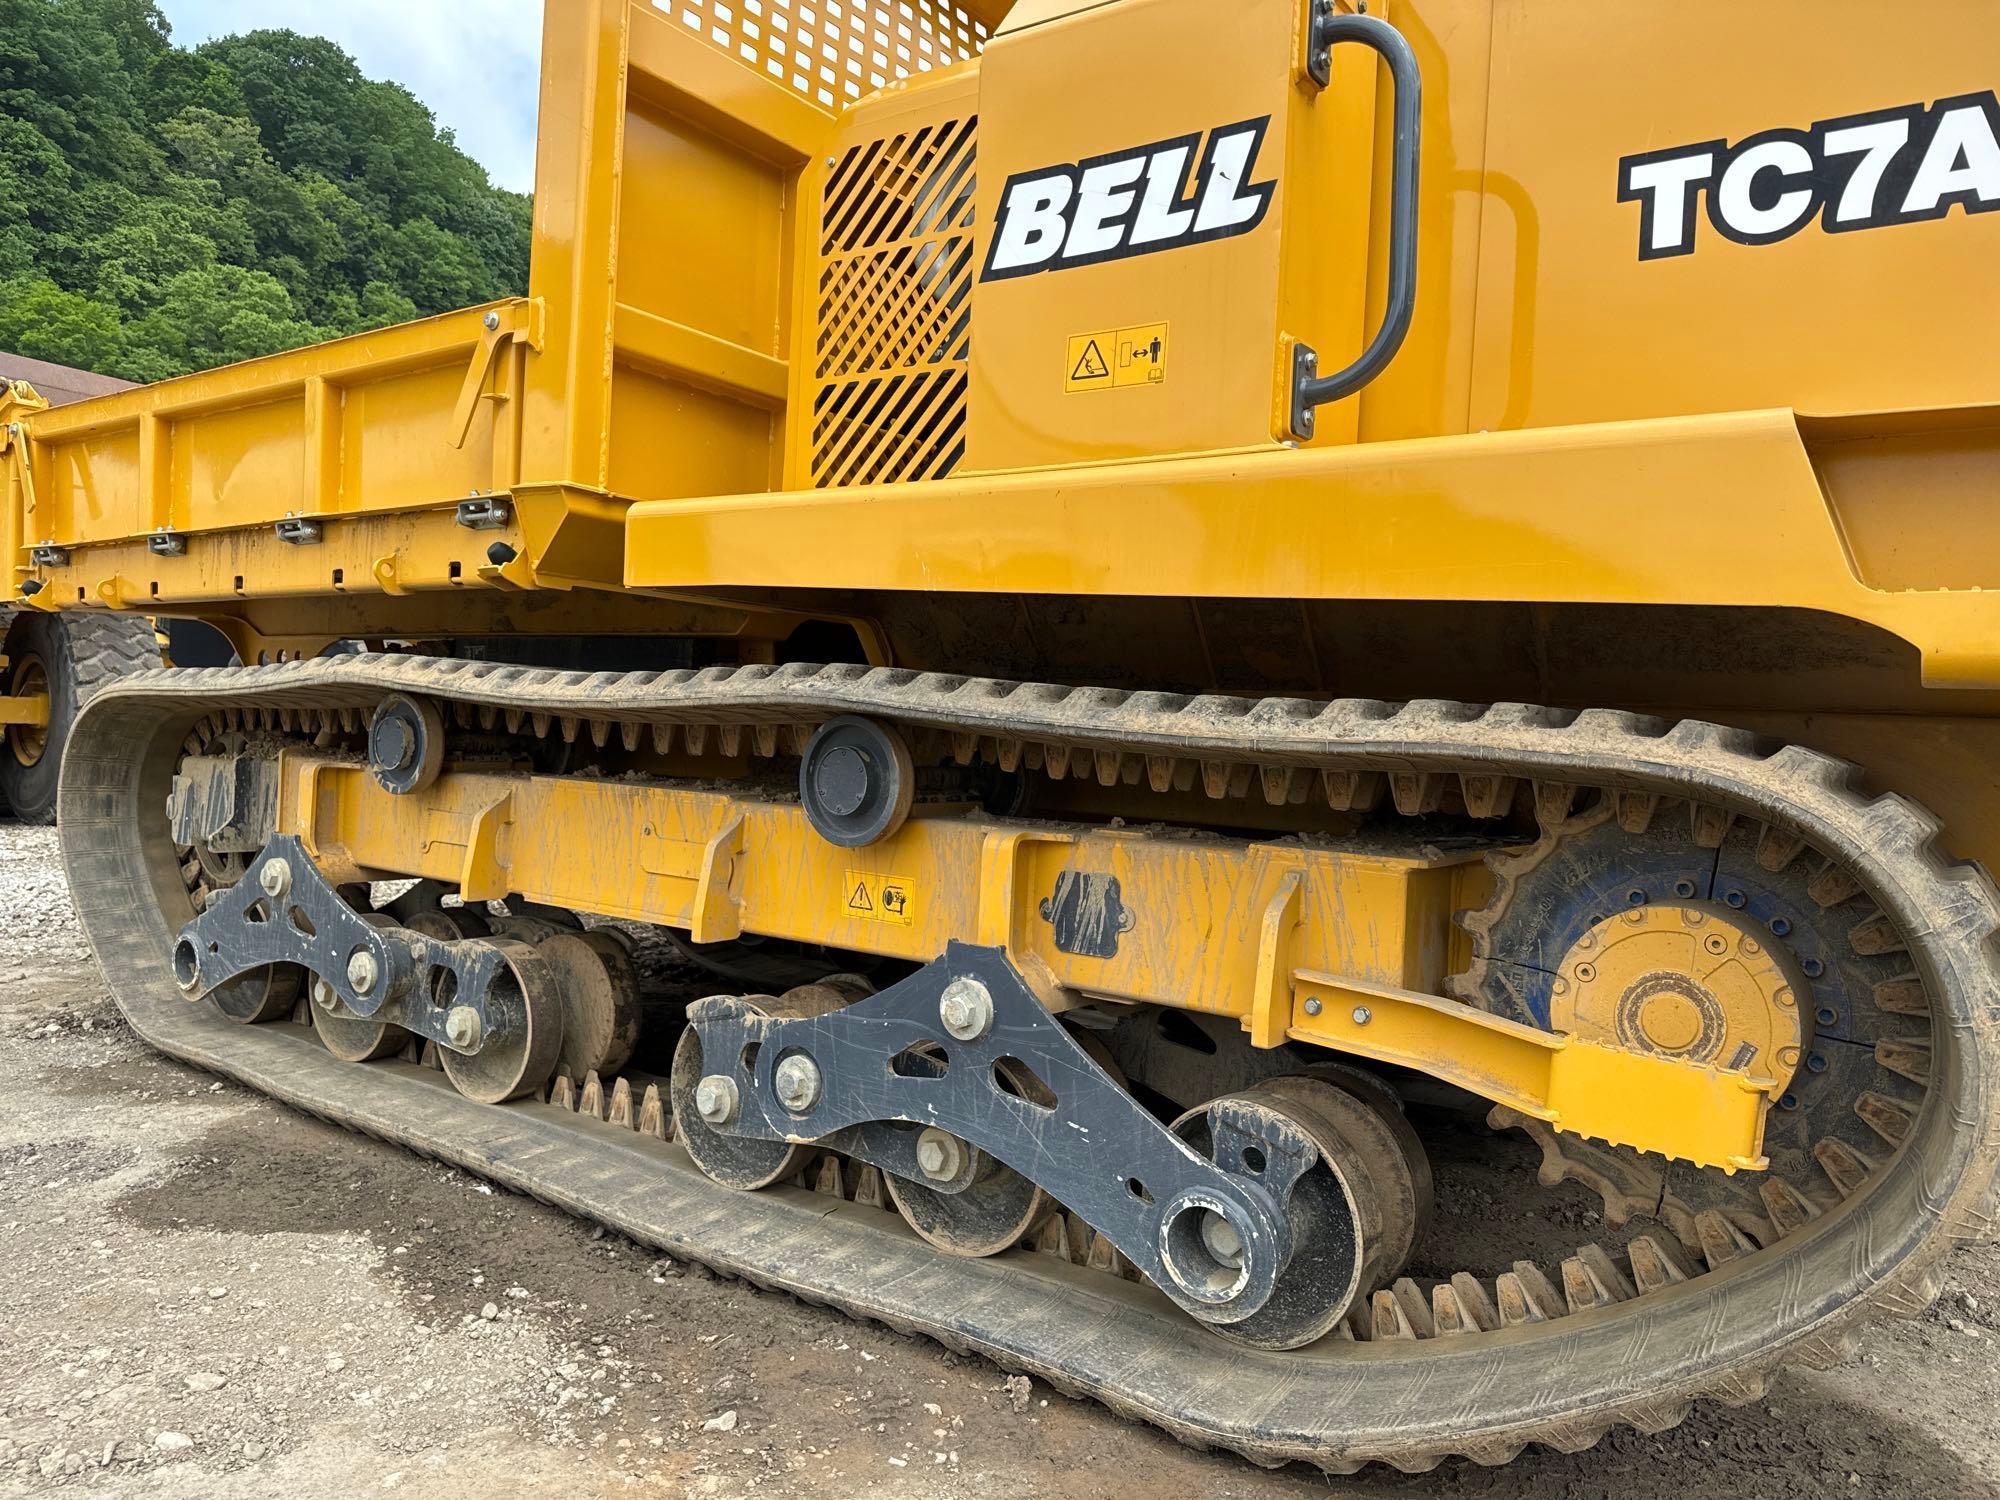 2022 BELL TC7A CRAWLER CARRIER SN 000055 powered by Cummins B6.7 diesel engine, equipped with EROPS,